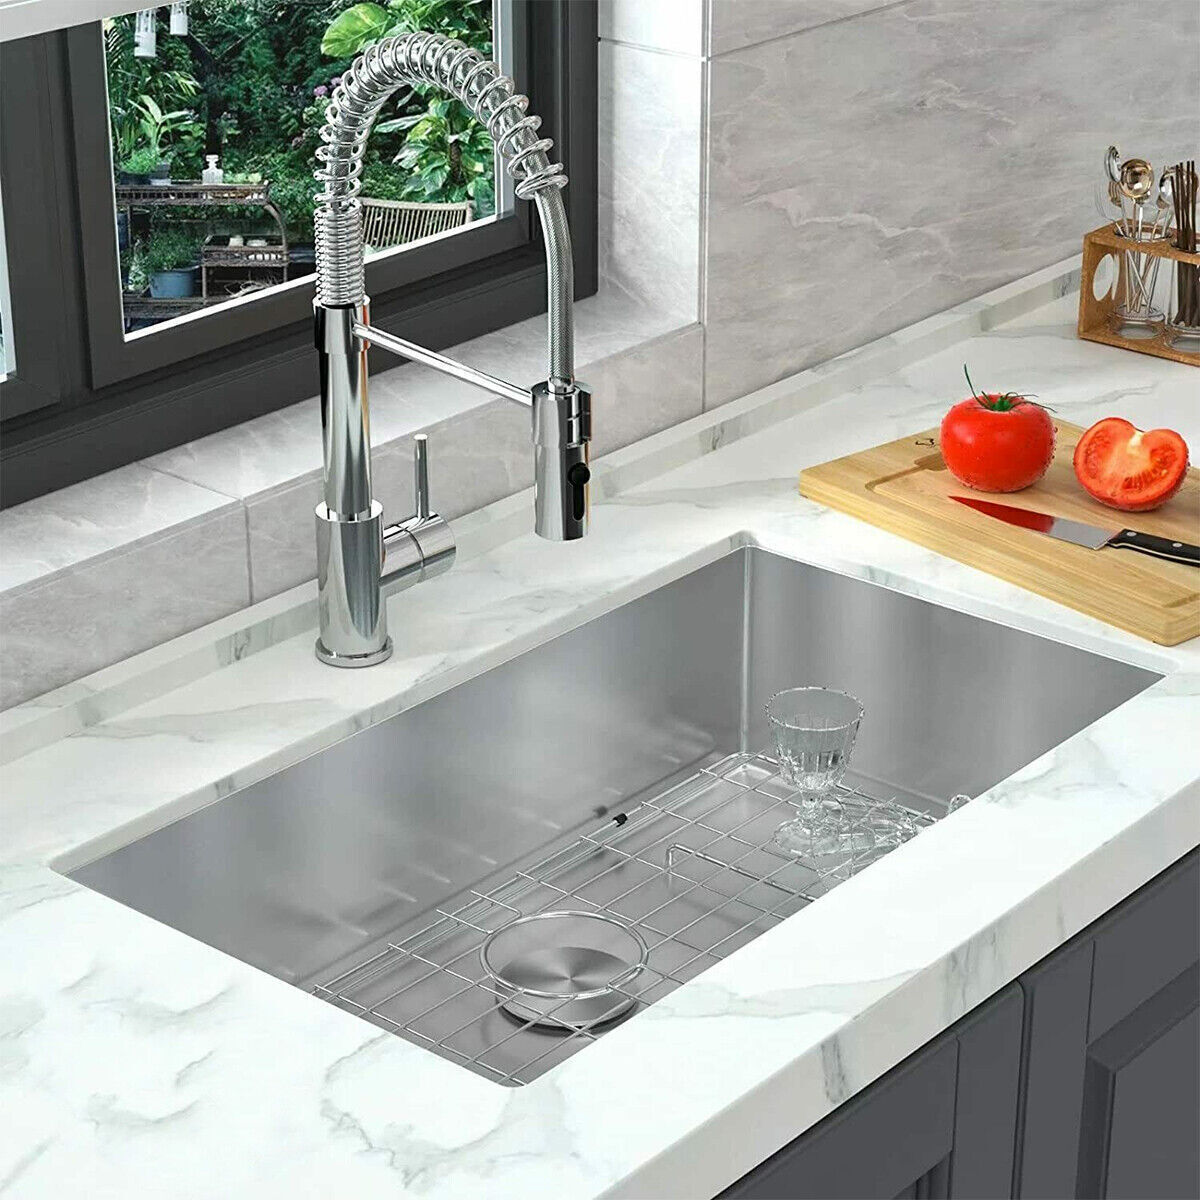 Kitchen Single Bowl Sink with Faucet Stainless Steel Undermount Sink 30x18x9 in